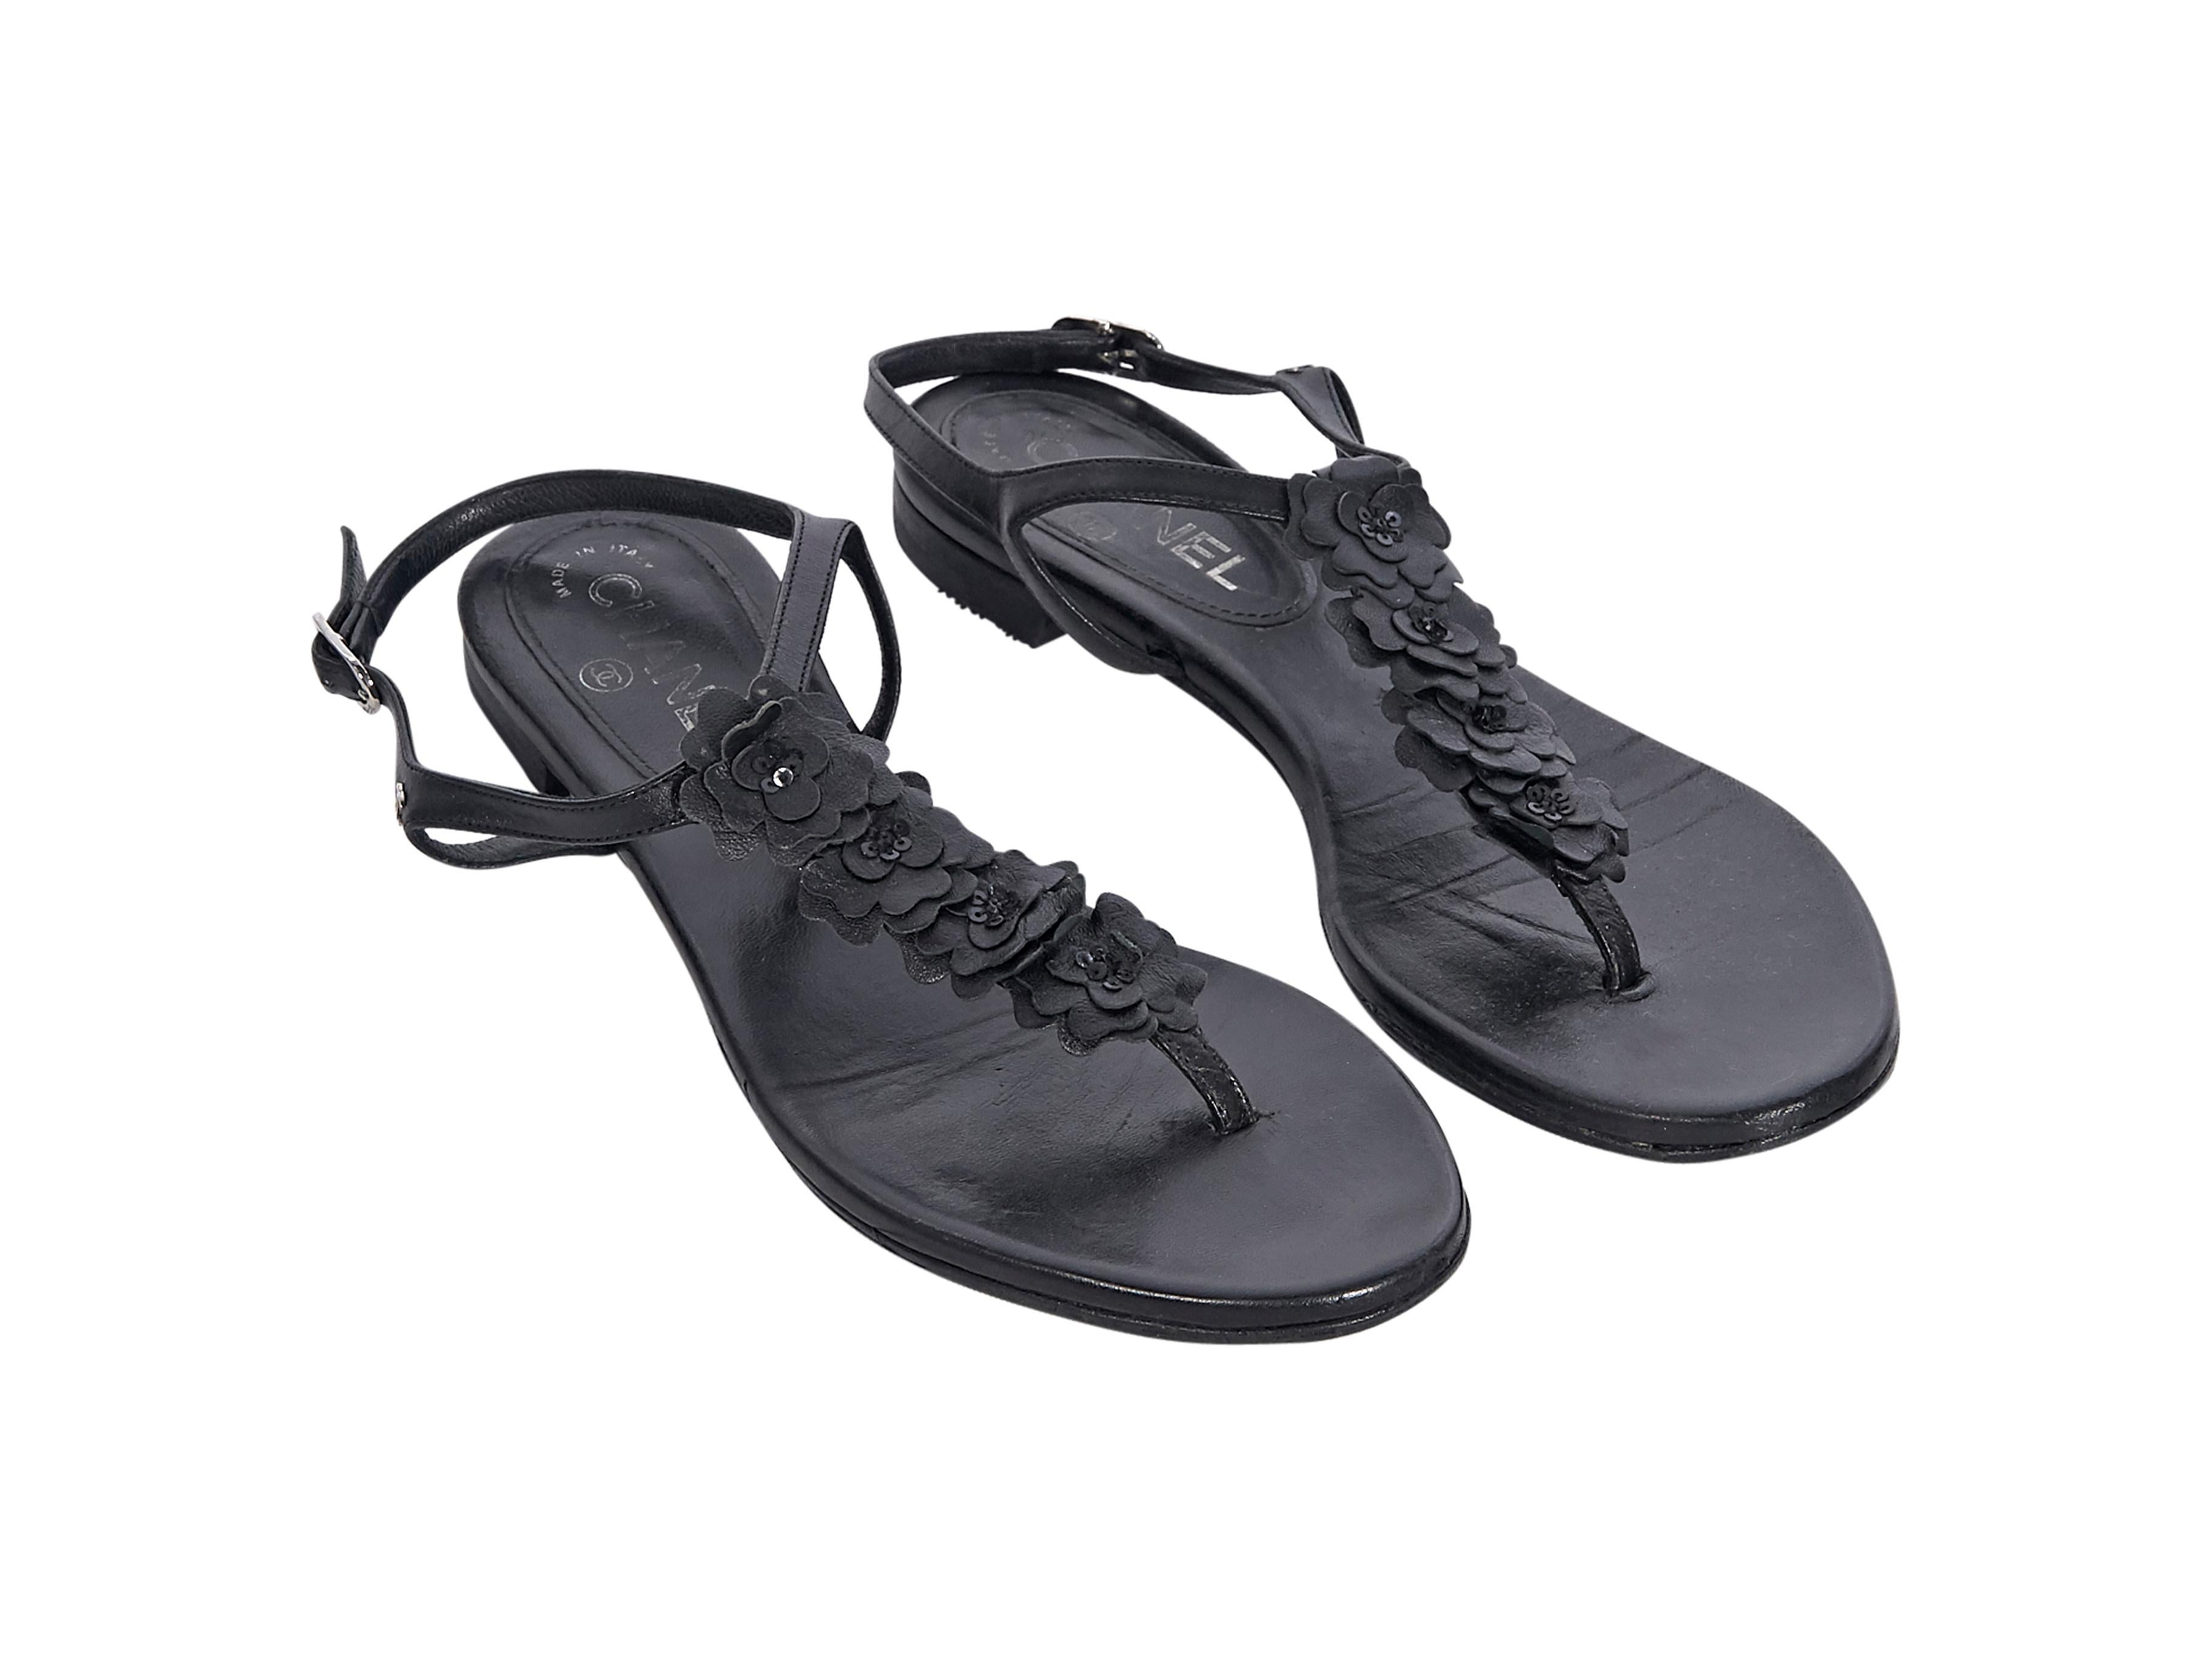 Product details:  Black leather thong sandals by Chanel.  Adjustable ankle strap.  T-strap accented with camellia floral applique.  Silvertone hardware.  
Condition: Pre-owned. Very good.
Est. Retail $ 995.00